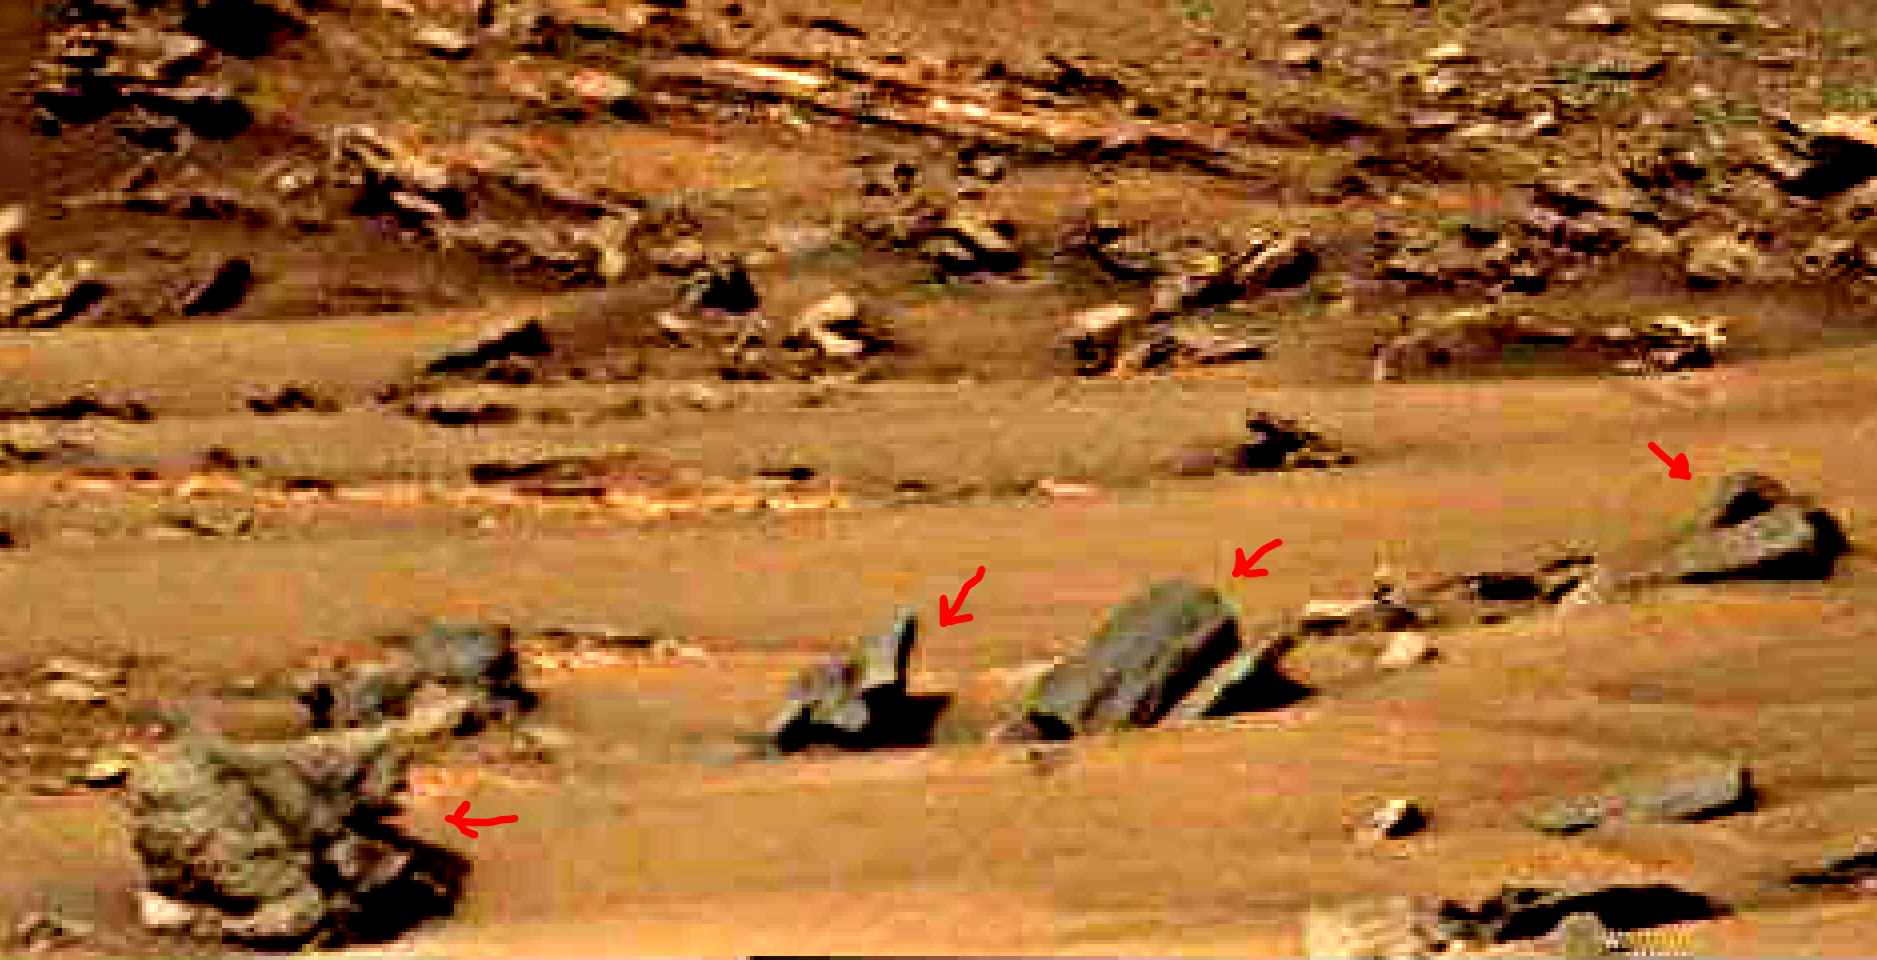 mars-sol-1463-anomaly-artifacts-27-was-life-on-mars